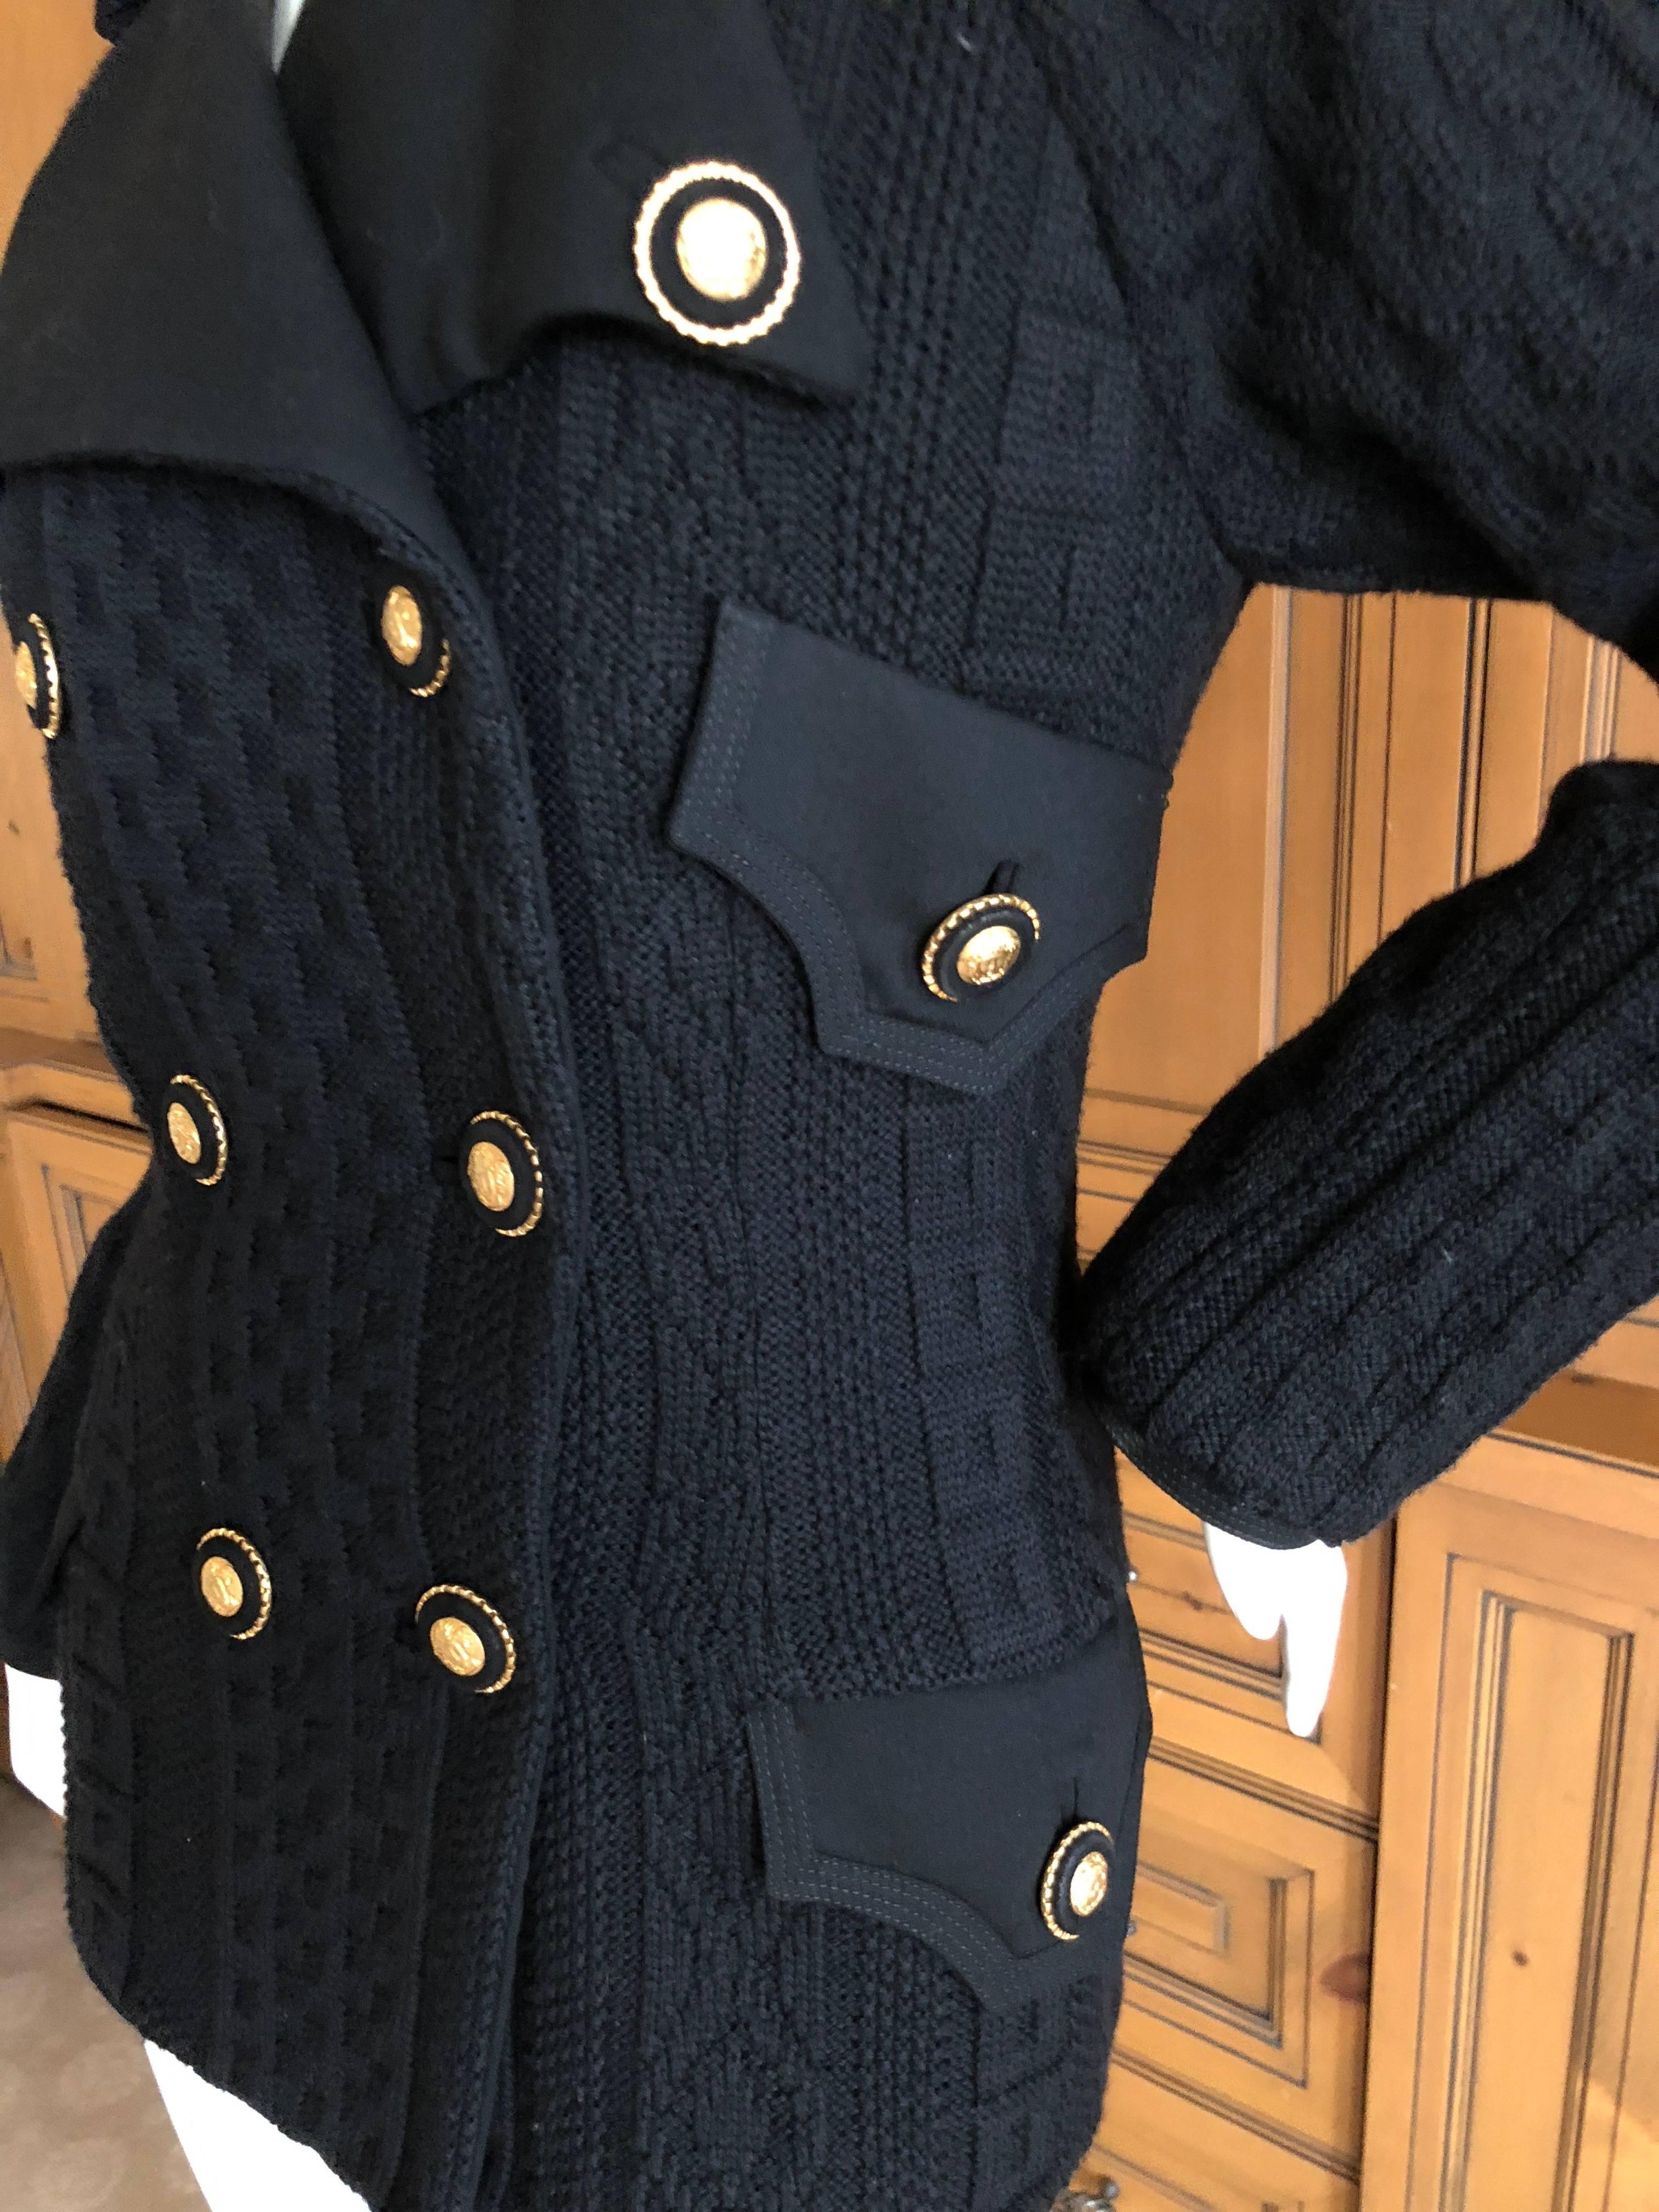 Gianni Versace Couture 1980's Black Knit Jacket with Medusa Buttons 1